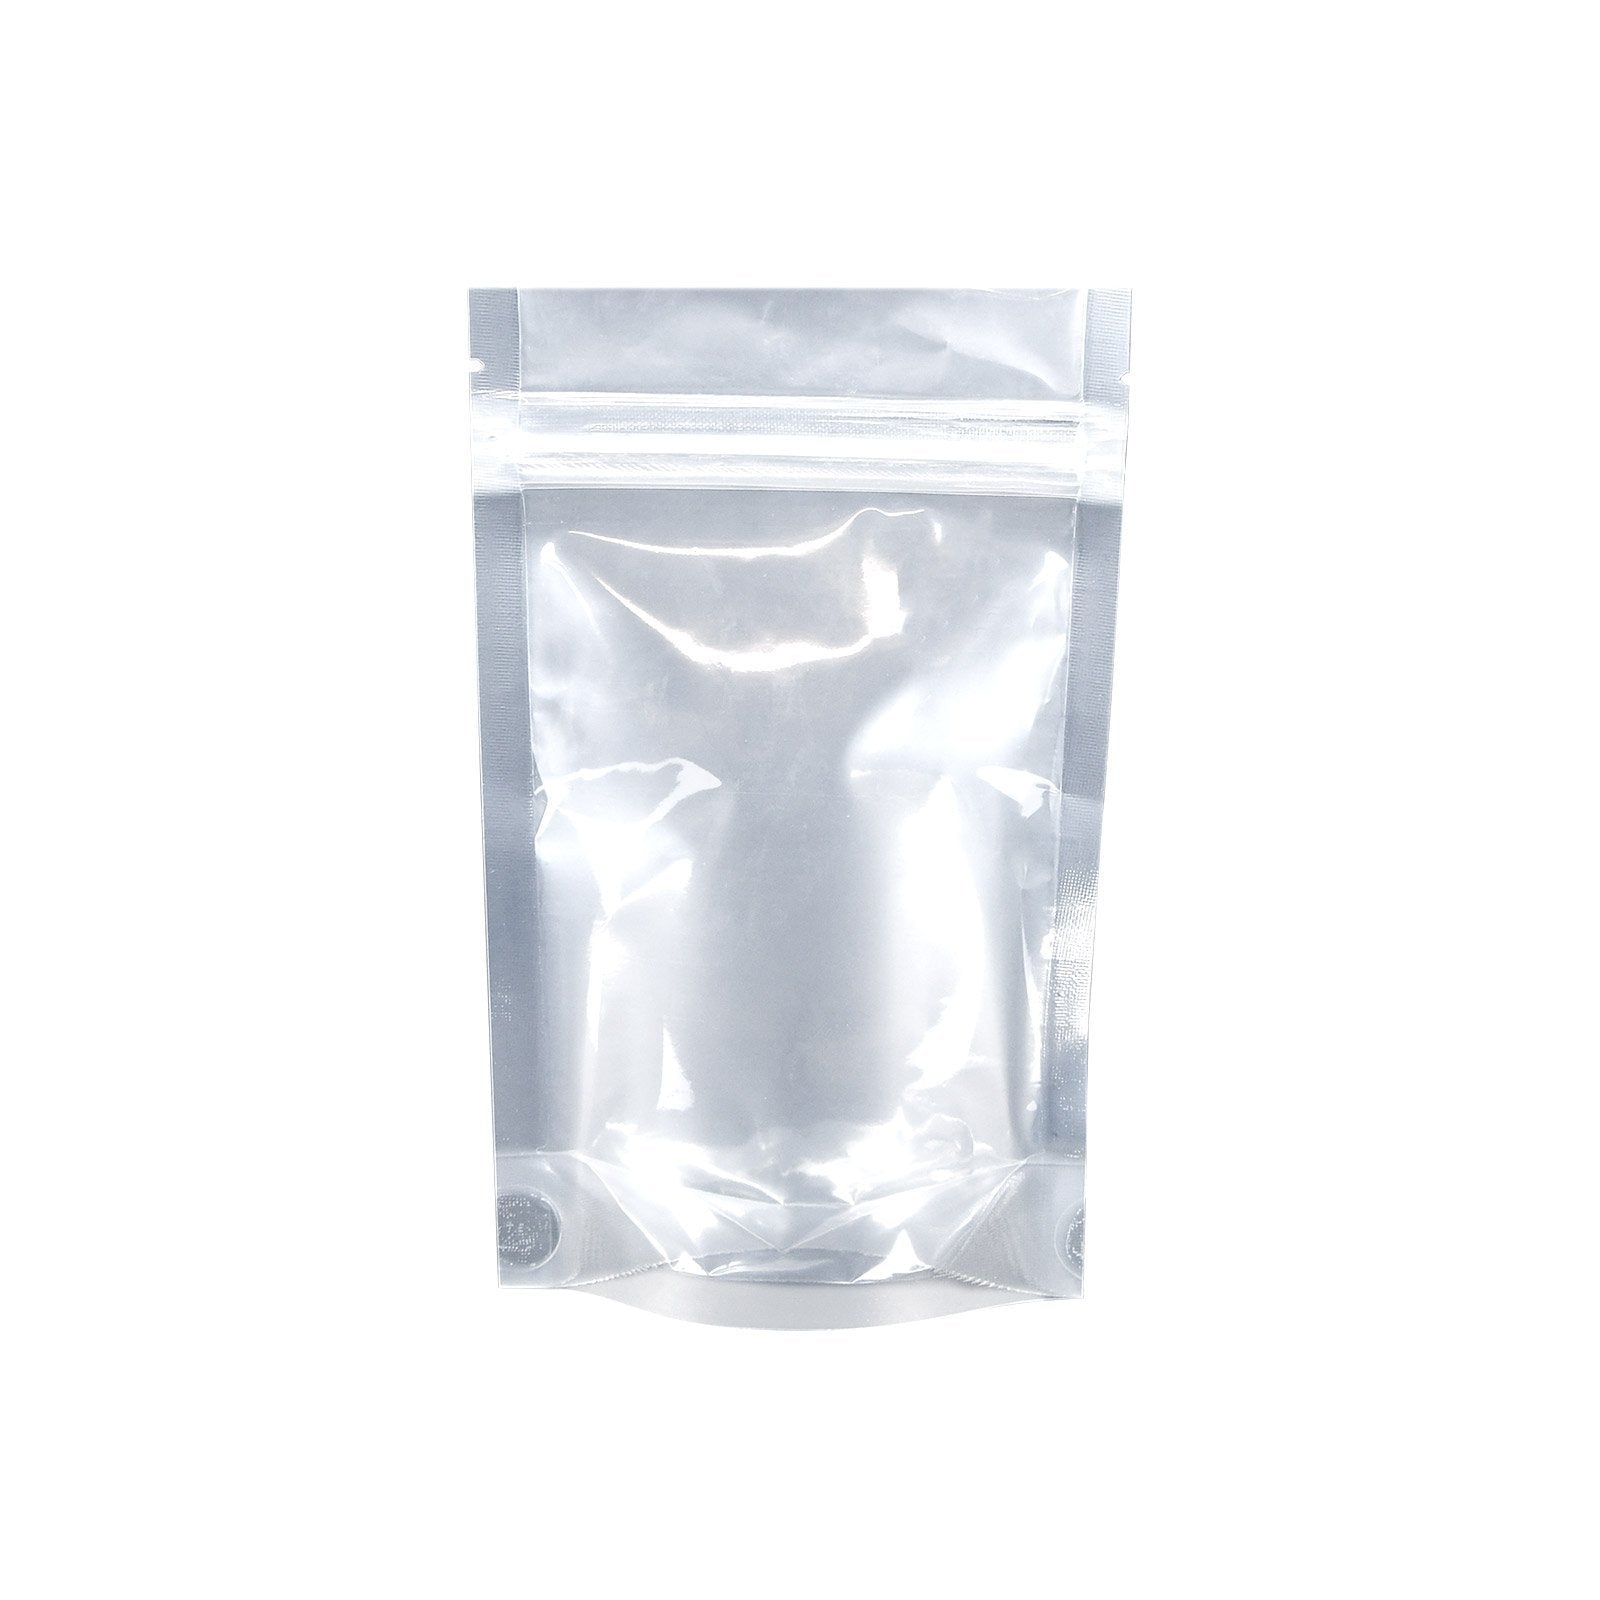 Mylar Bag Tear Notch Clear Black 1/4 oz 1000 COUNT at Flower Power Packages